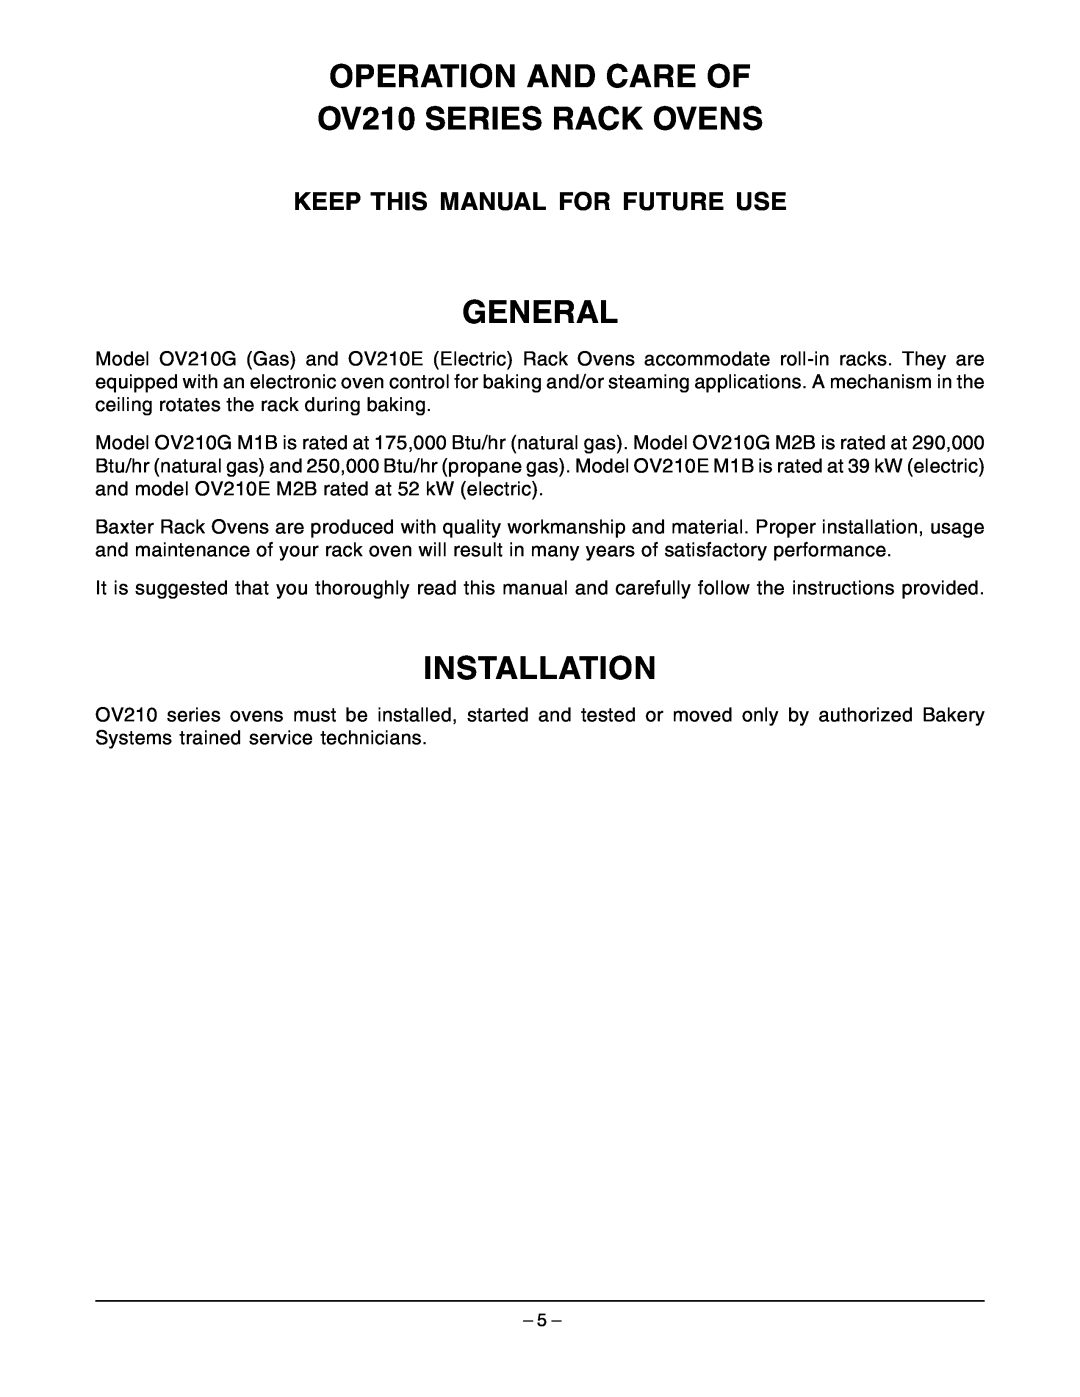 Hobart manual OPERATION AND CARE OF OV210 SERIES RACK OVENS, General, Installation, Keep This Manual For Future Use 